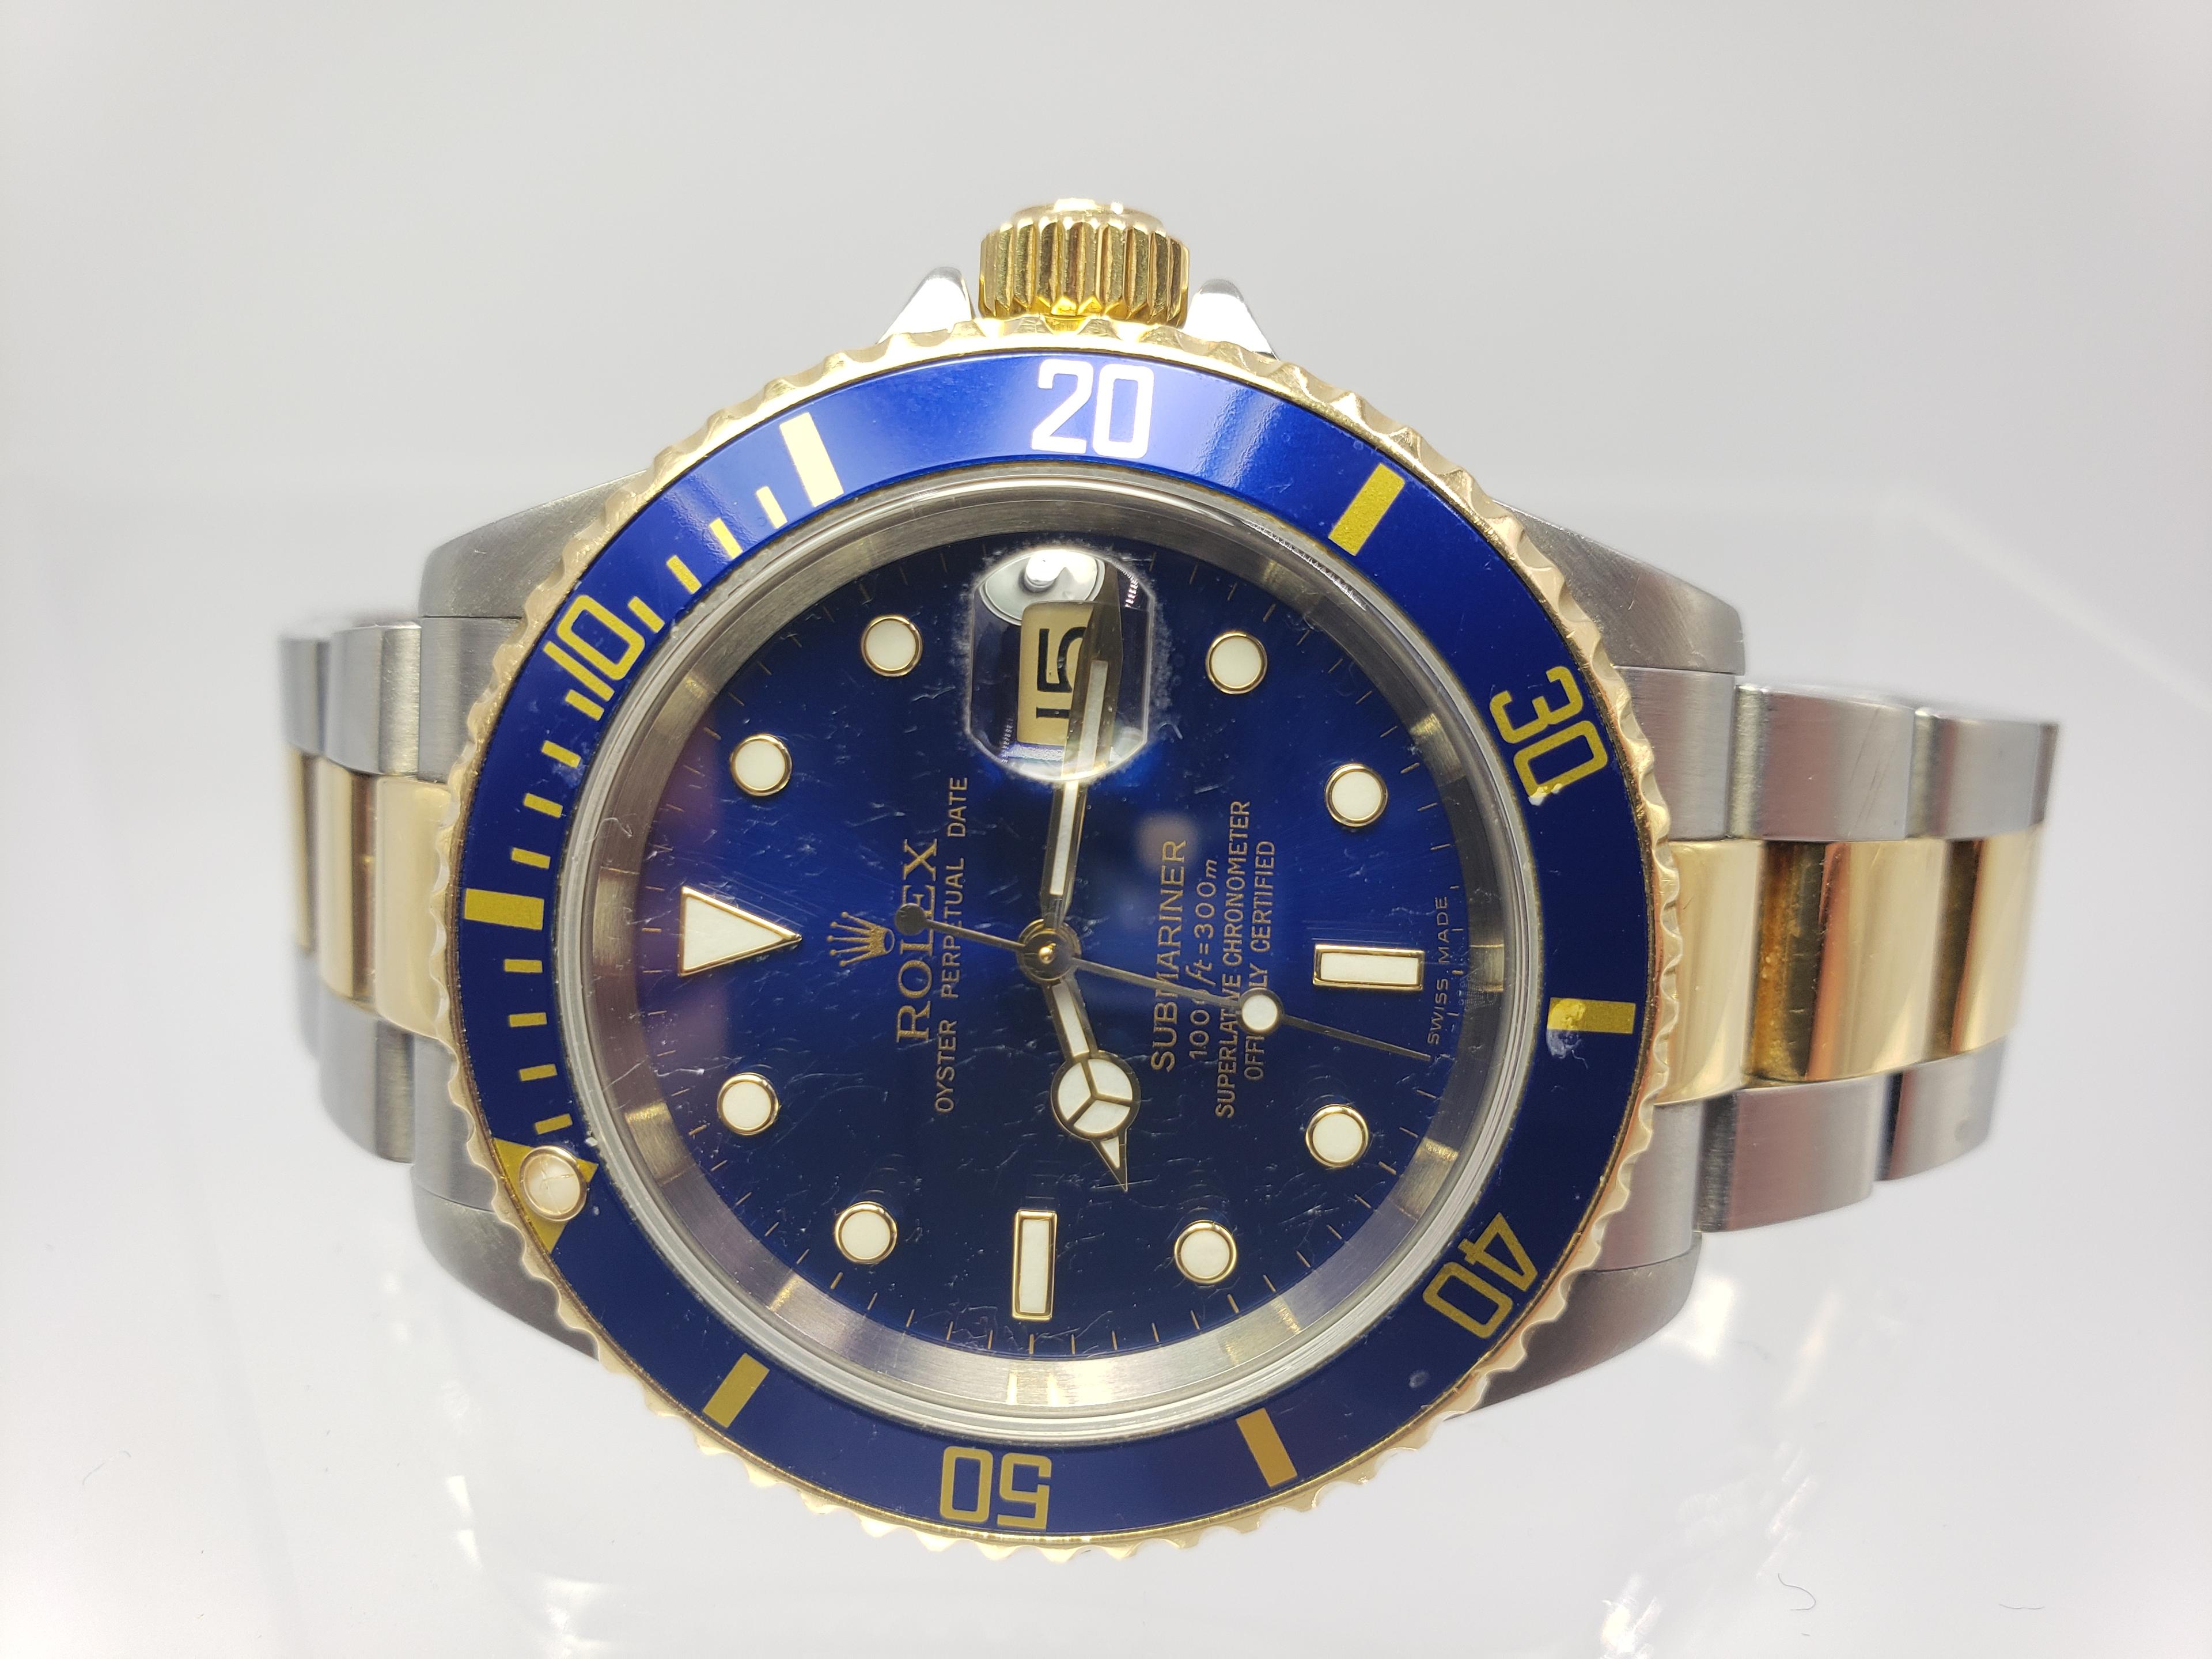 TWO TONE SUBMARINER ROLEX WATCH WITH BLUE DIAL